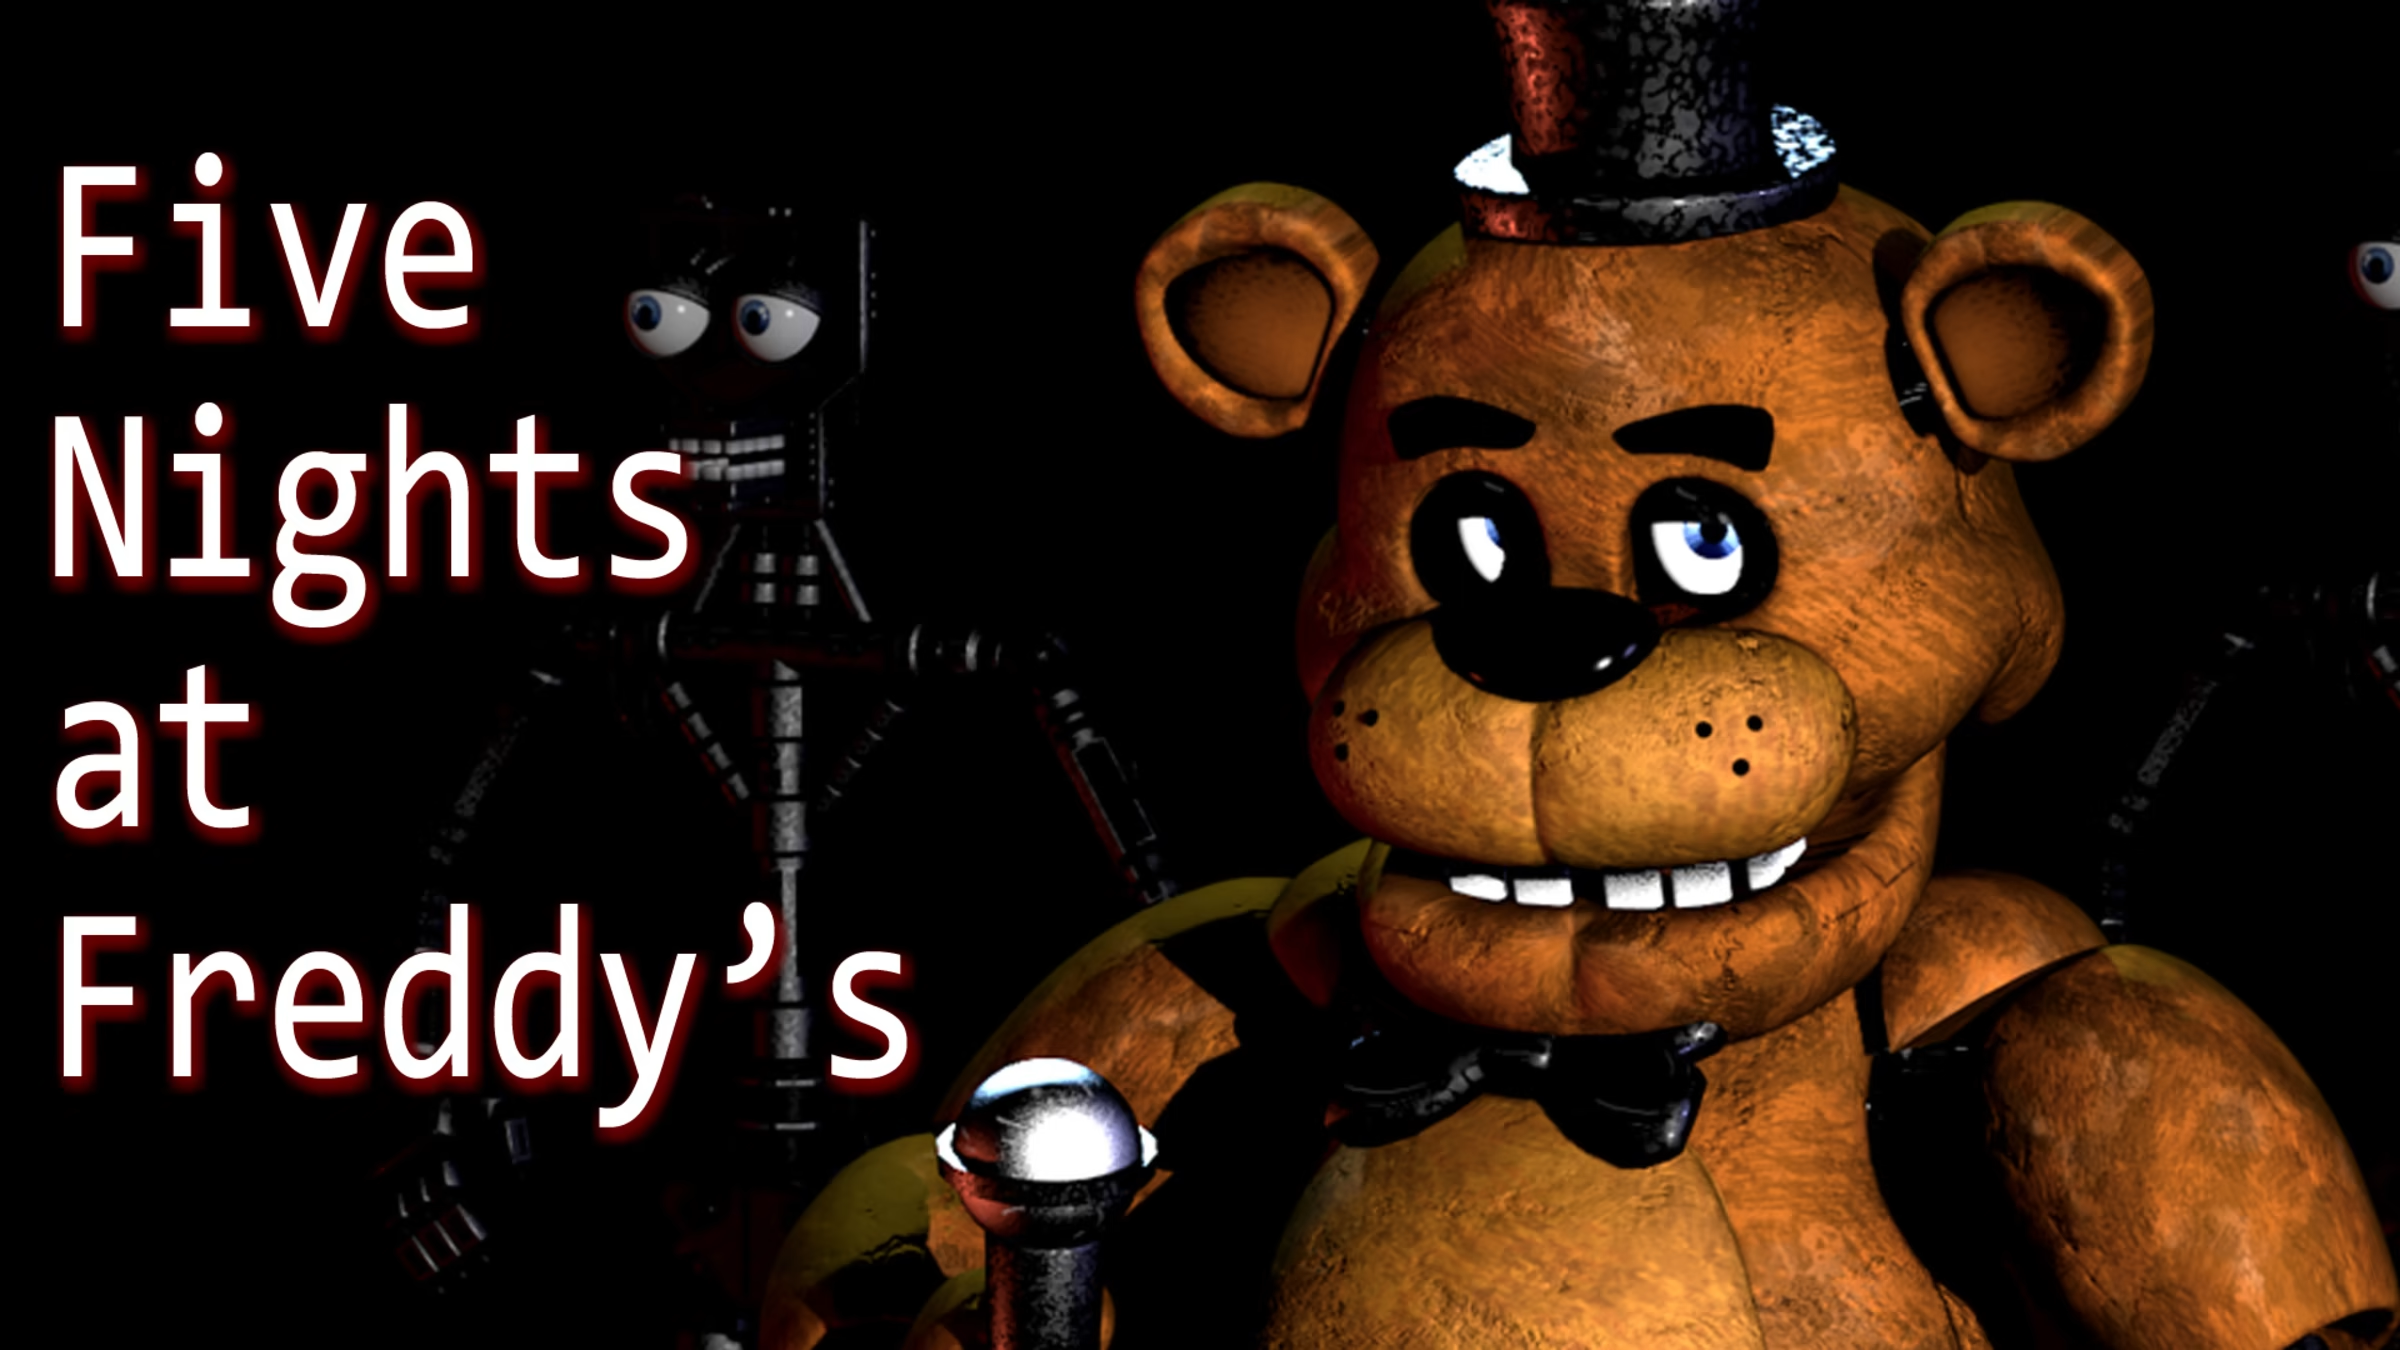 On which site was Five Nights at Freddy's 1 first published before it came out on Steam?